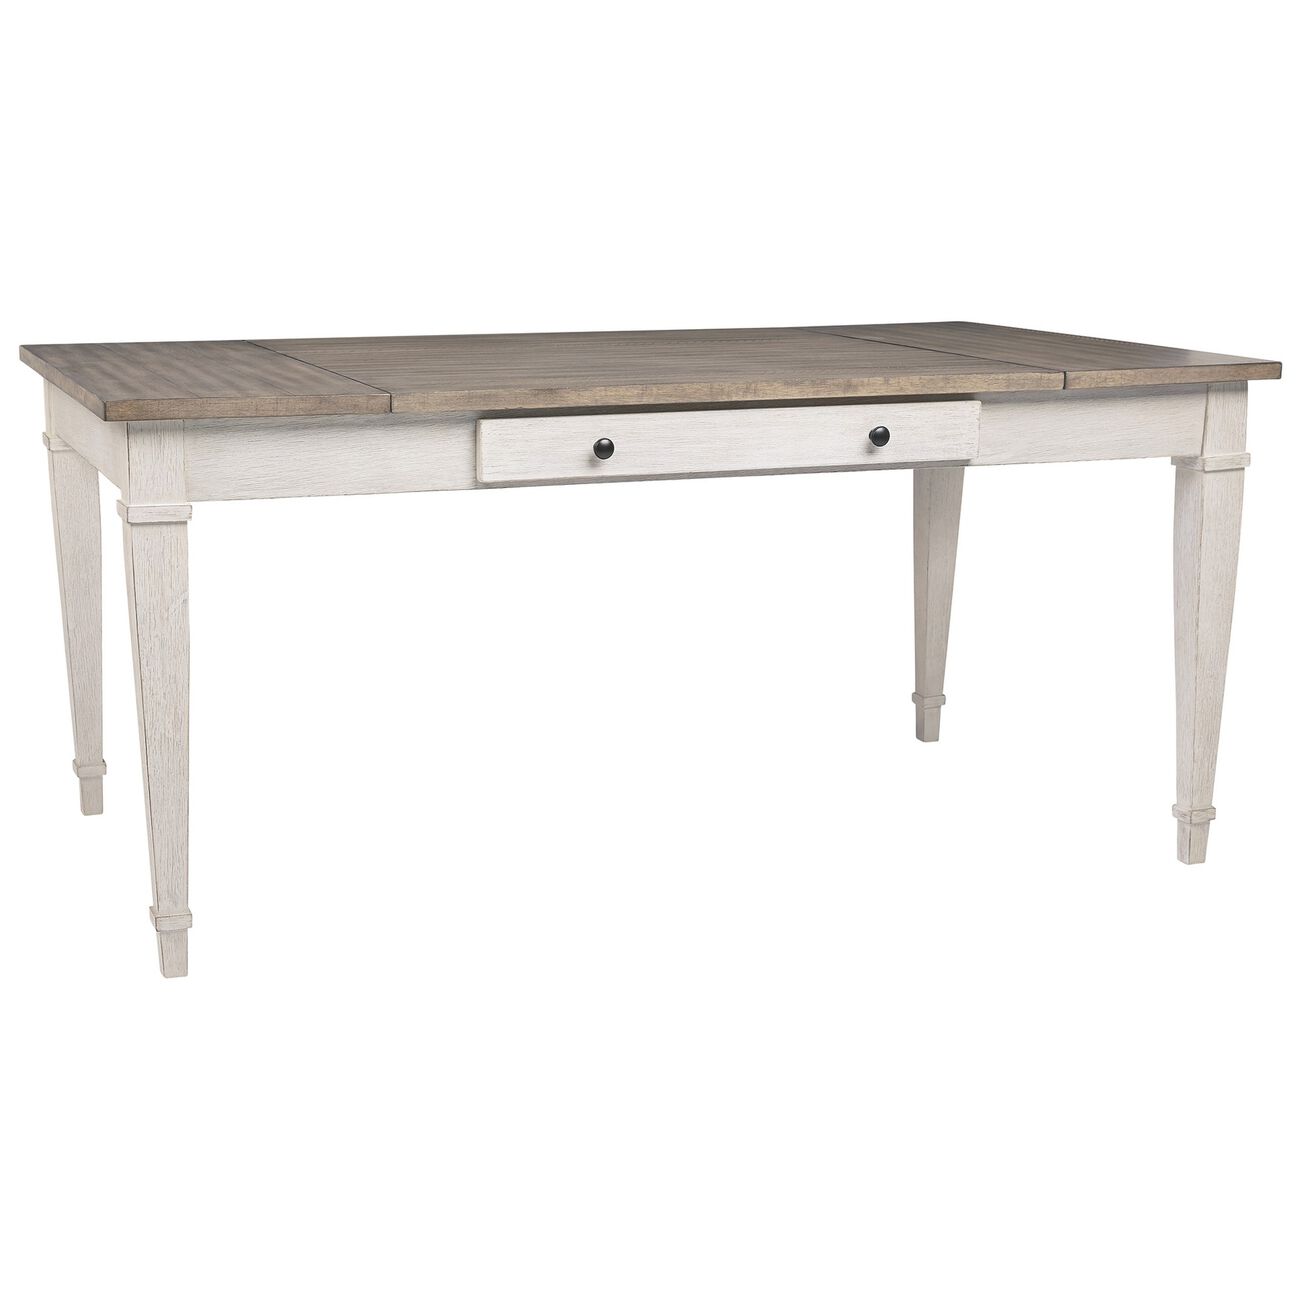 Rectangular Two Tone Wooden Dining Table with Storage, White and Brown